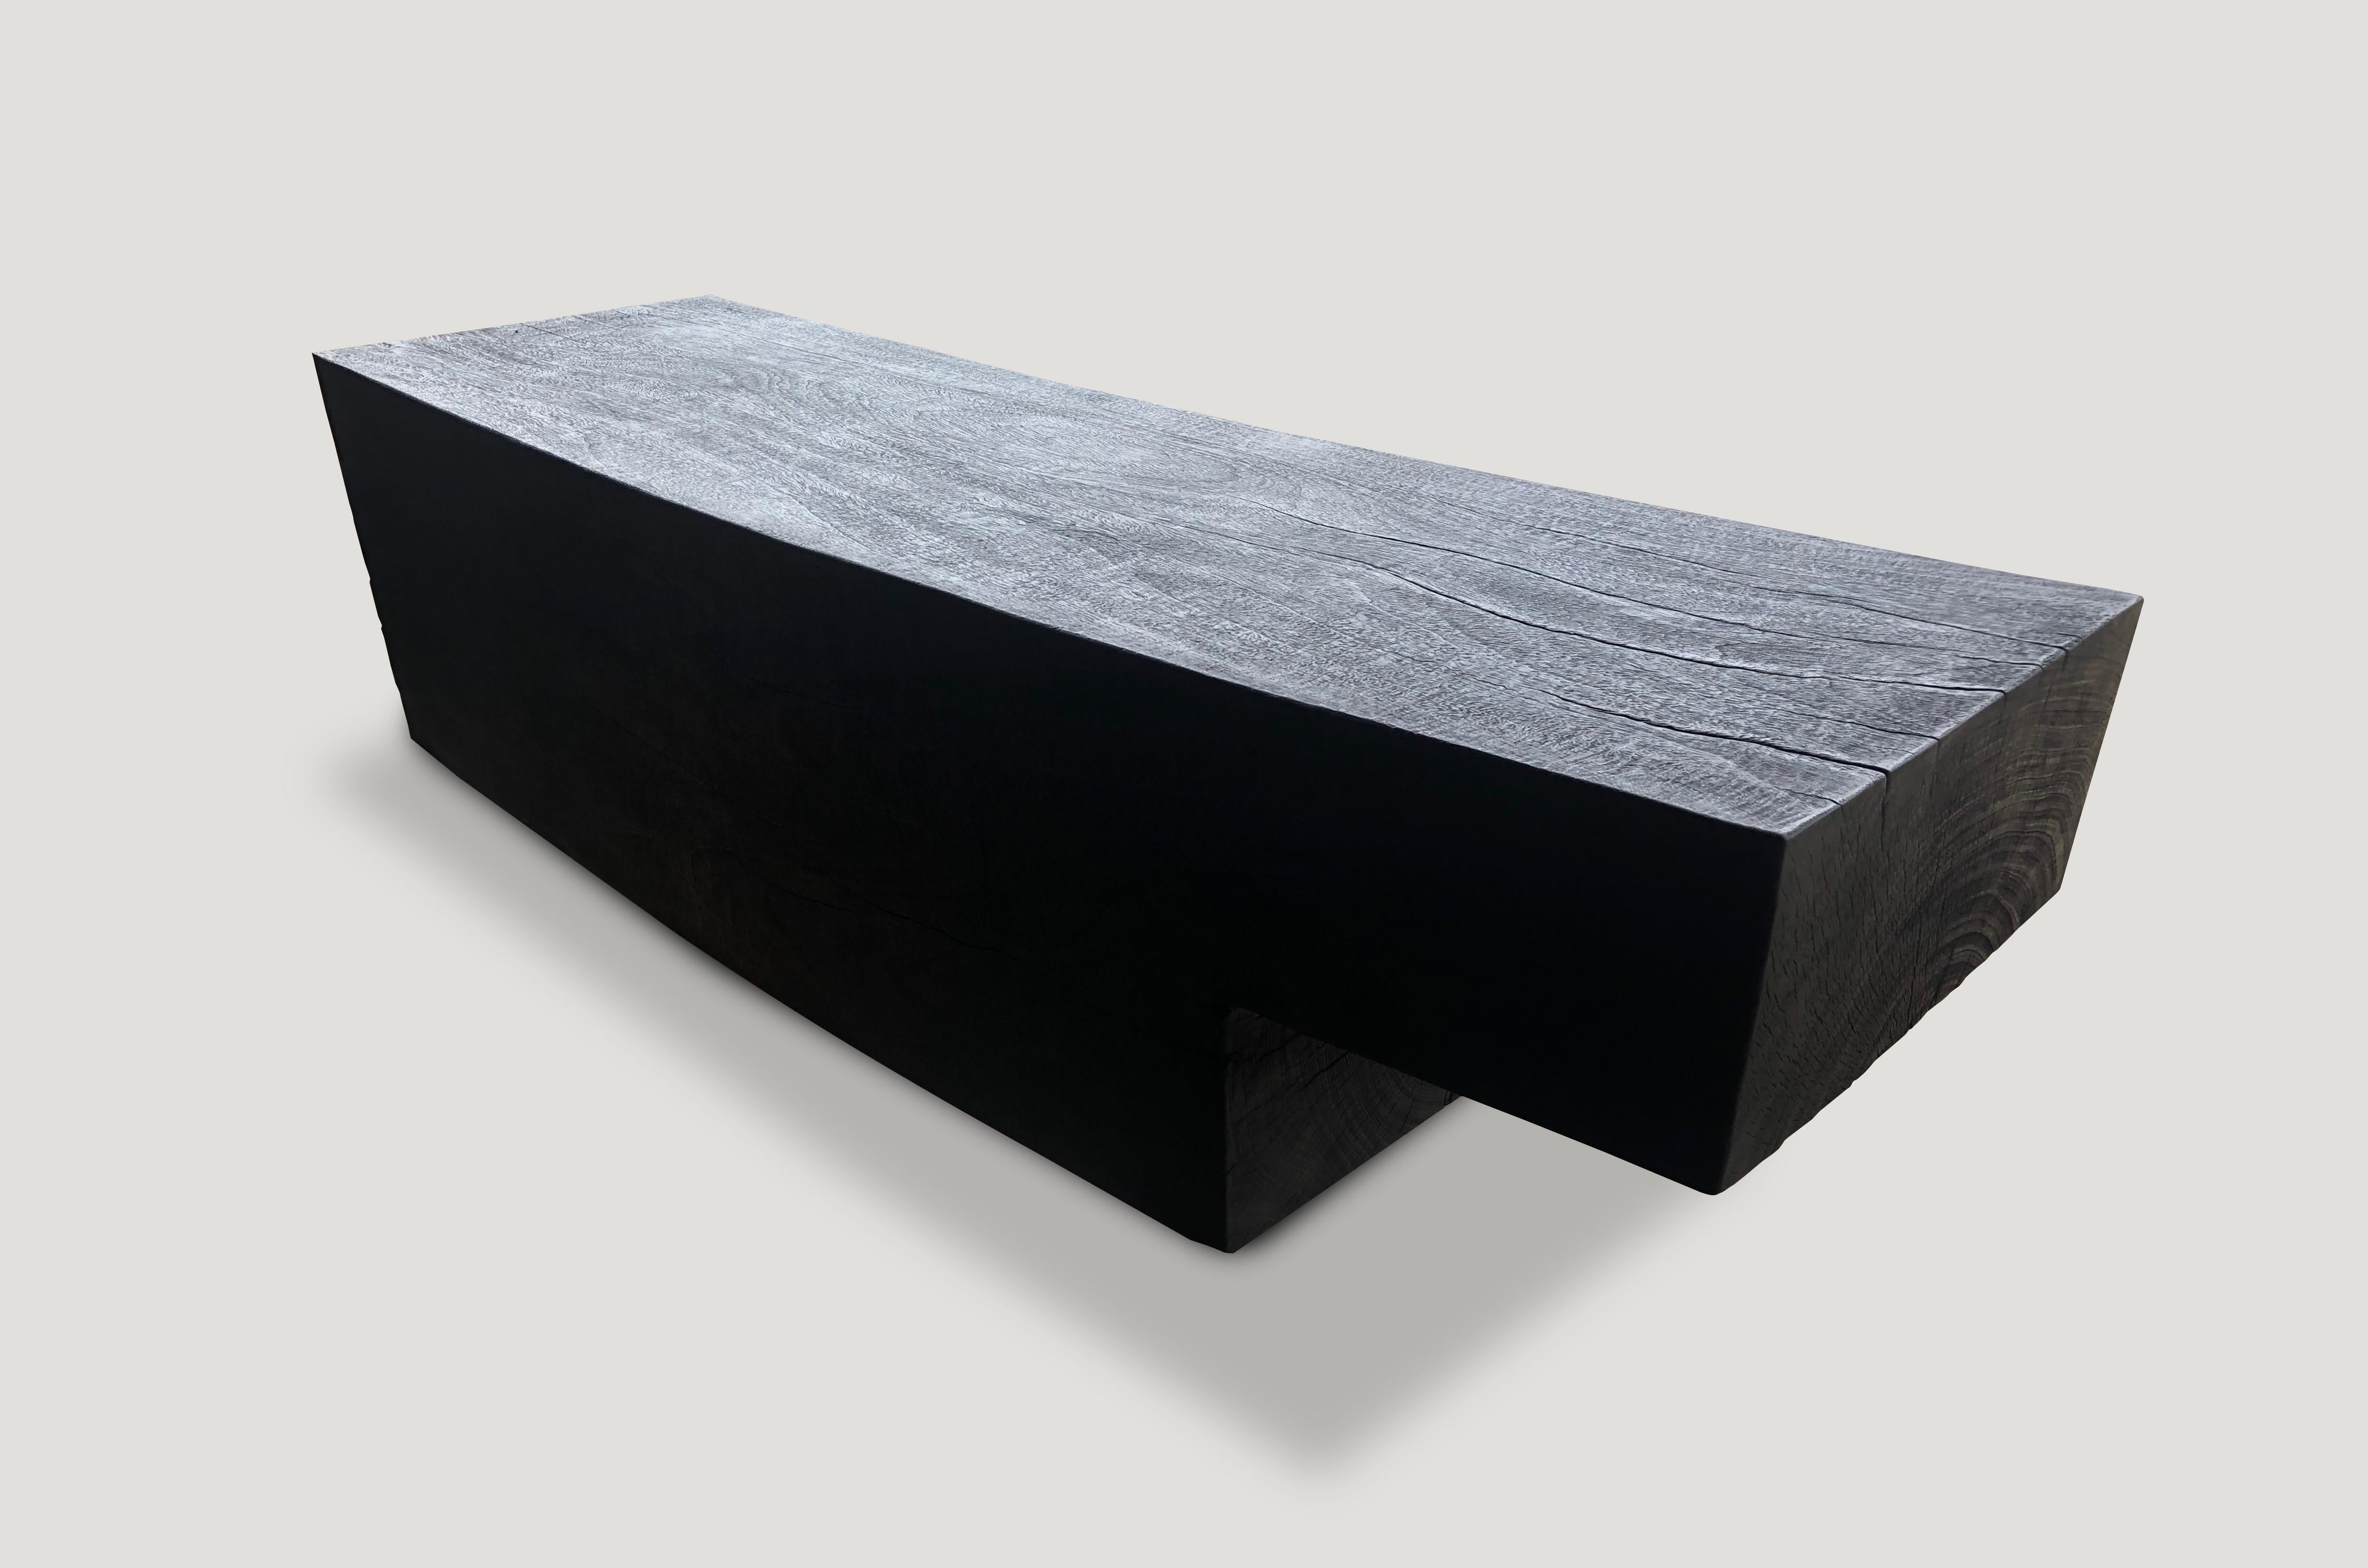 Impressive minimalist charred suar wood log bench with a smooth satin finish. Charred, sanded and sealed revealing the beautiful wood grain. Custom finishes and sizes available. Please inquire.  

The Triple Burnt Collection represents a unique line